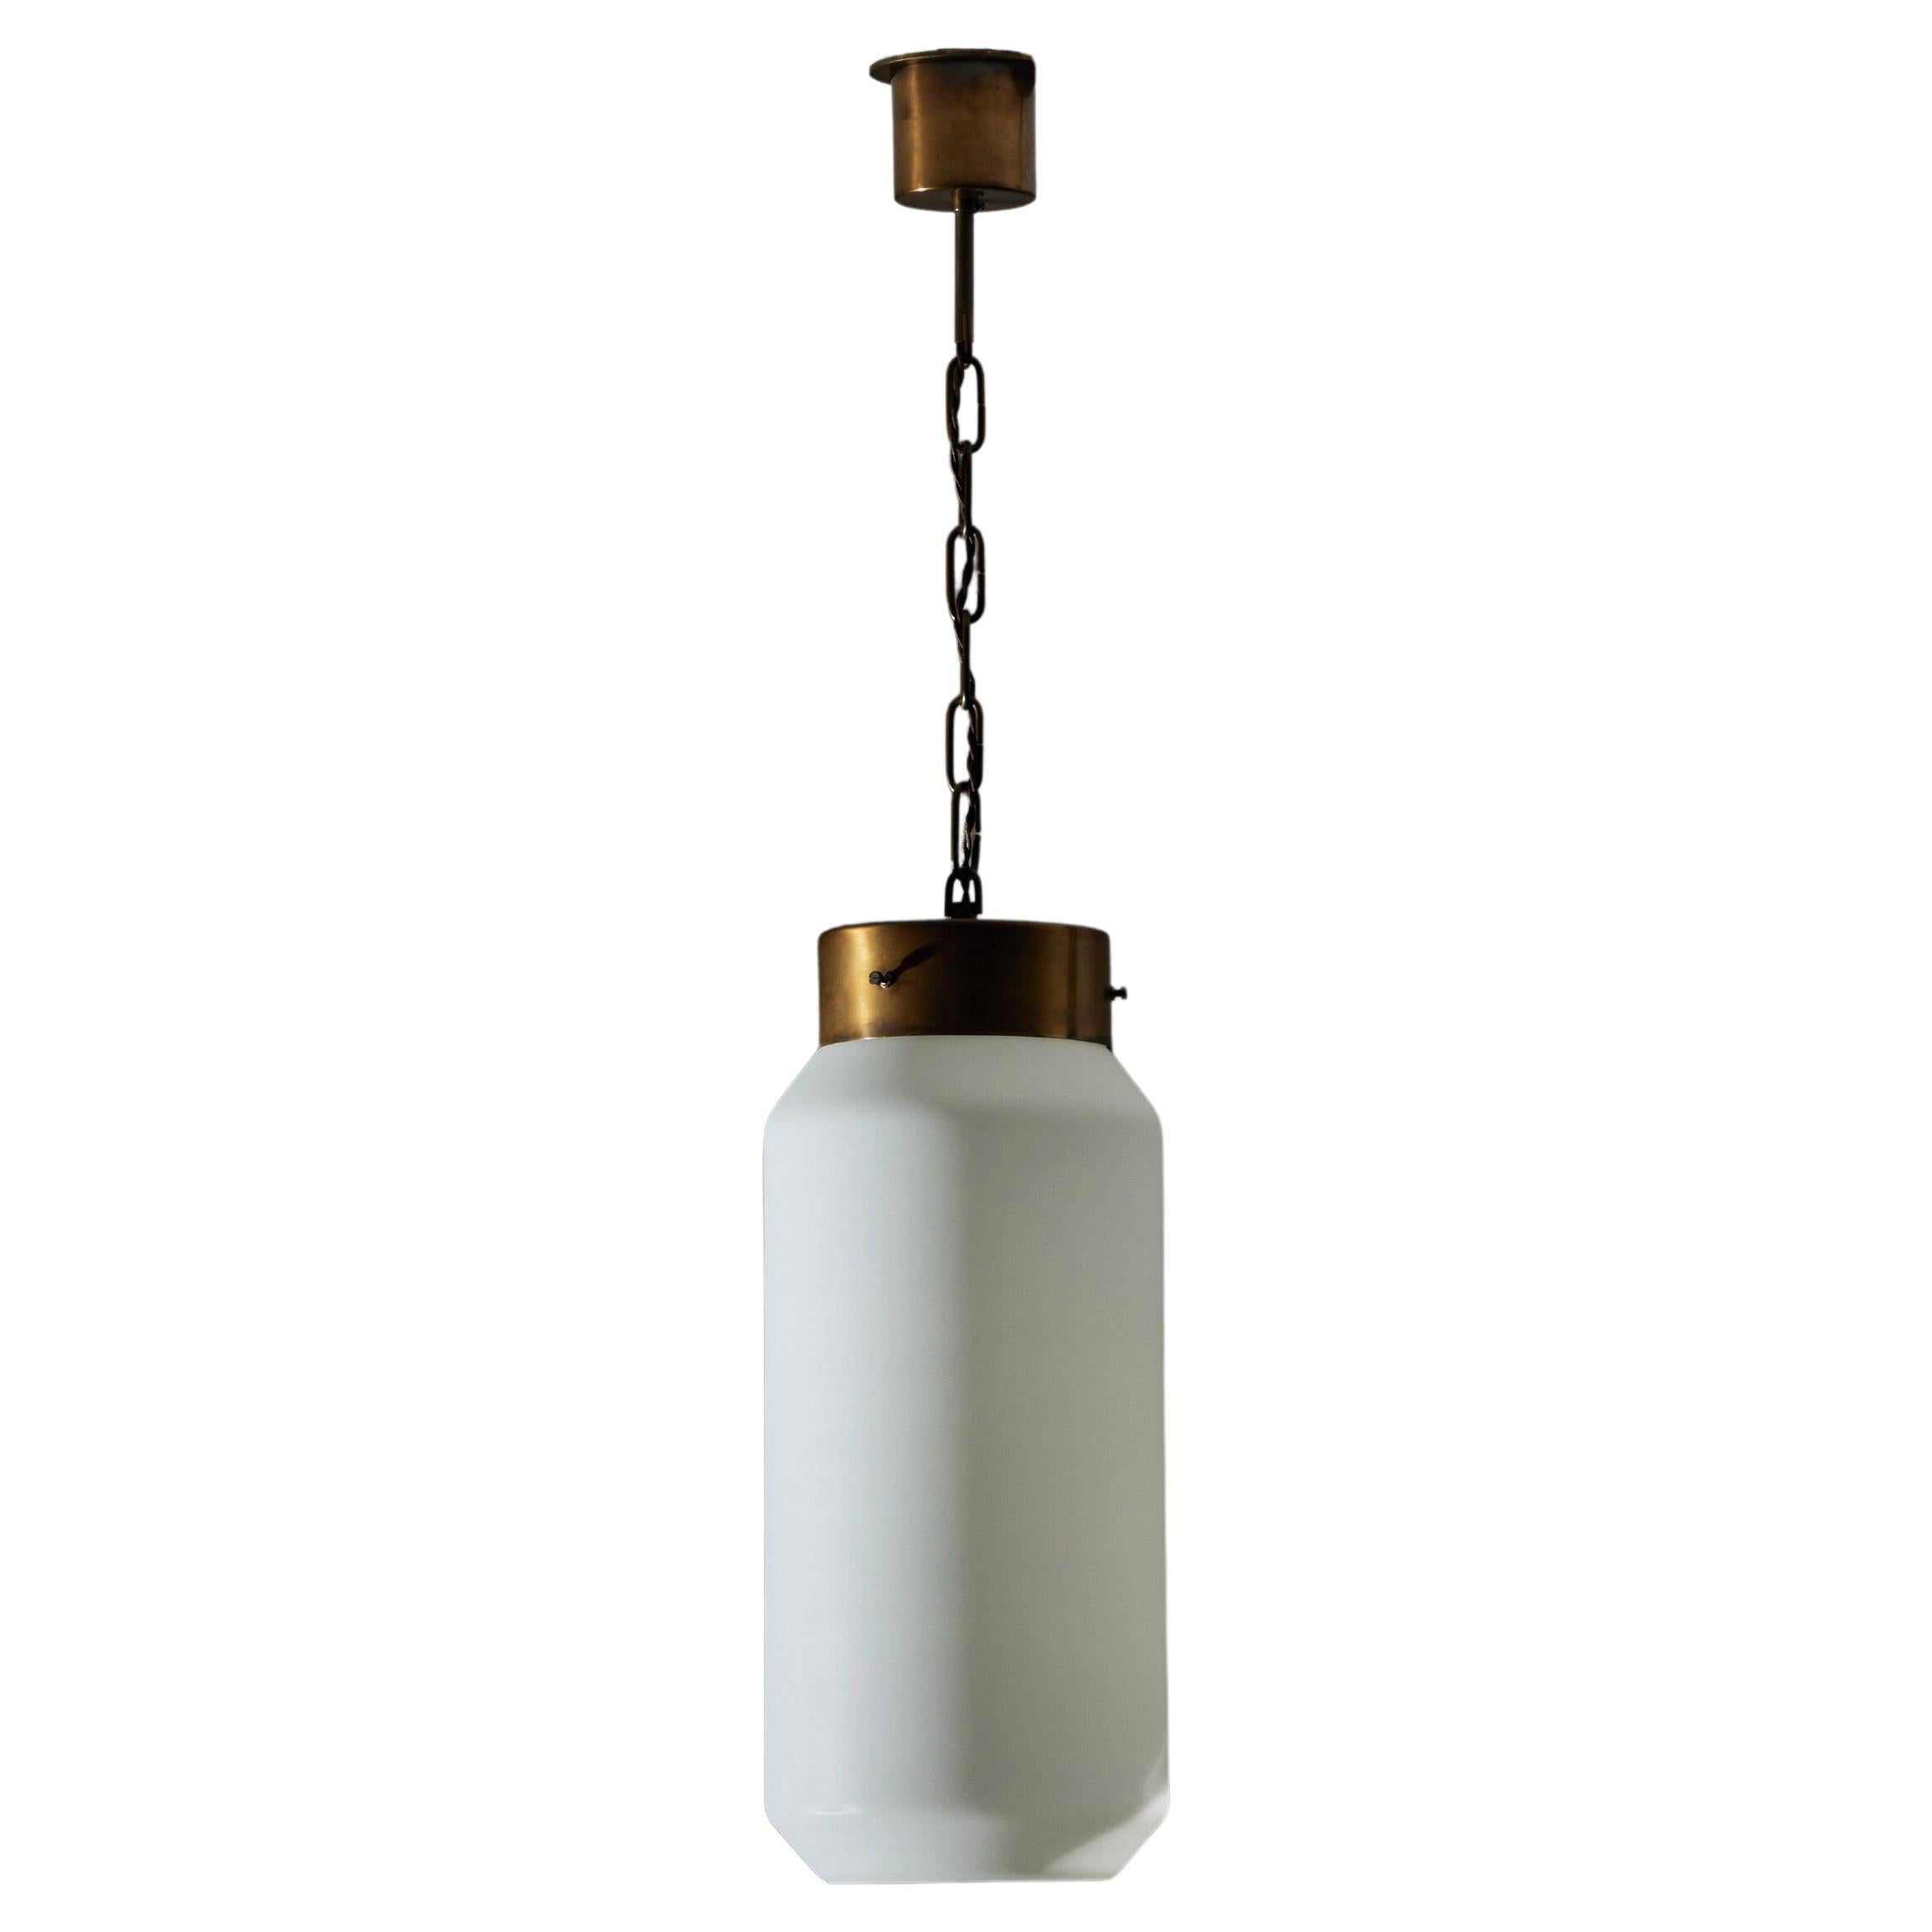 Single Ceiling Light by Caccia Dominioni for Azucena For Sale